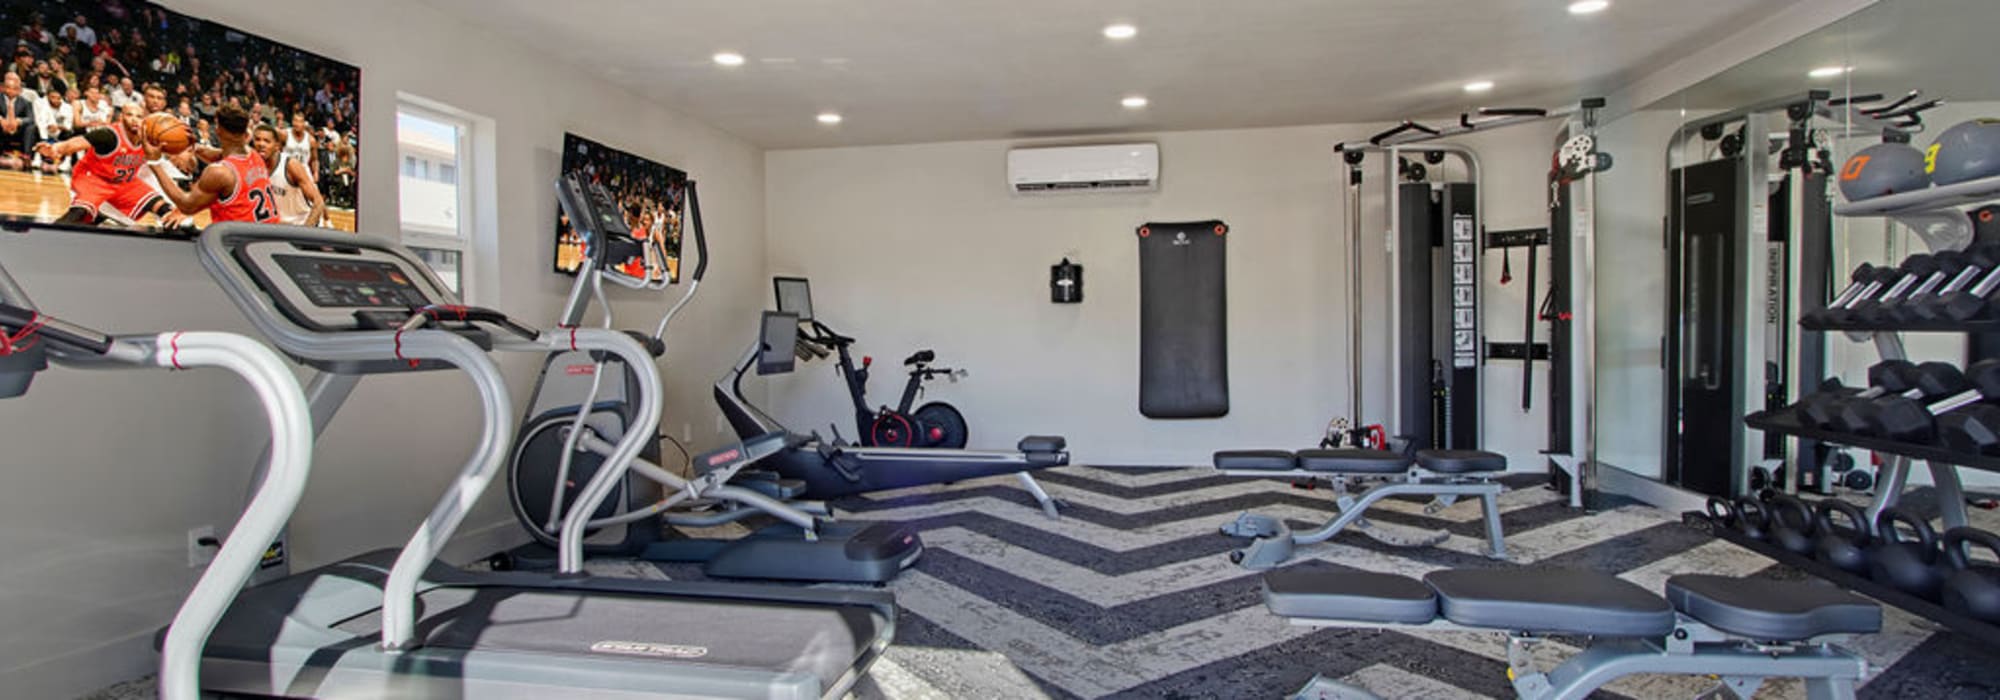 Gym with treadmills in the fitness center at Riverside Apartments in Tempe, Arizona